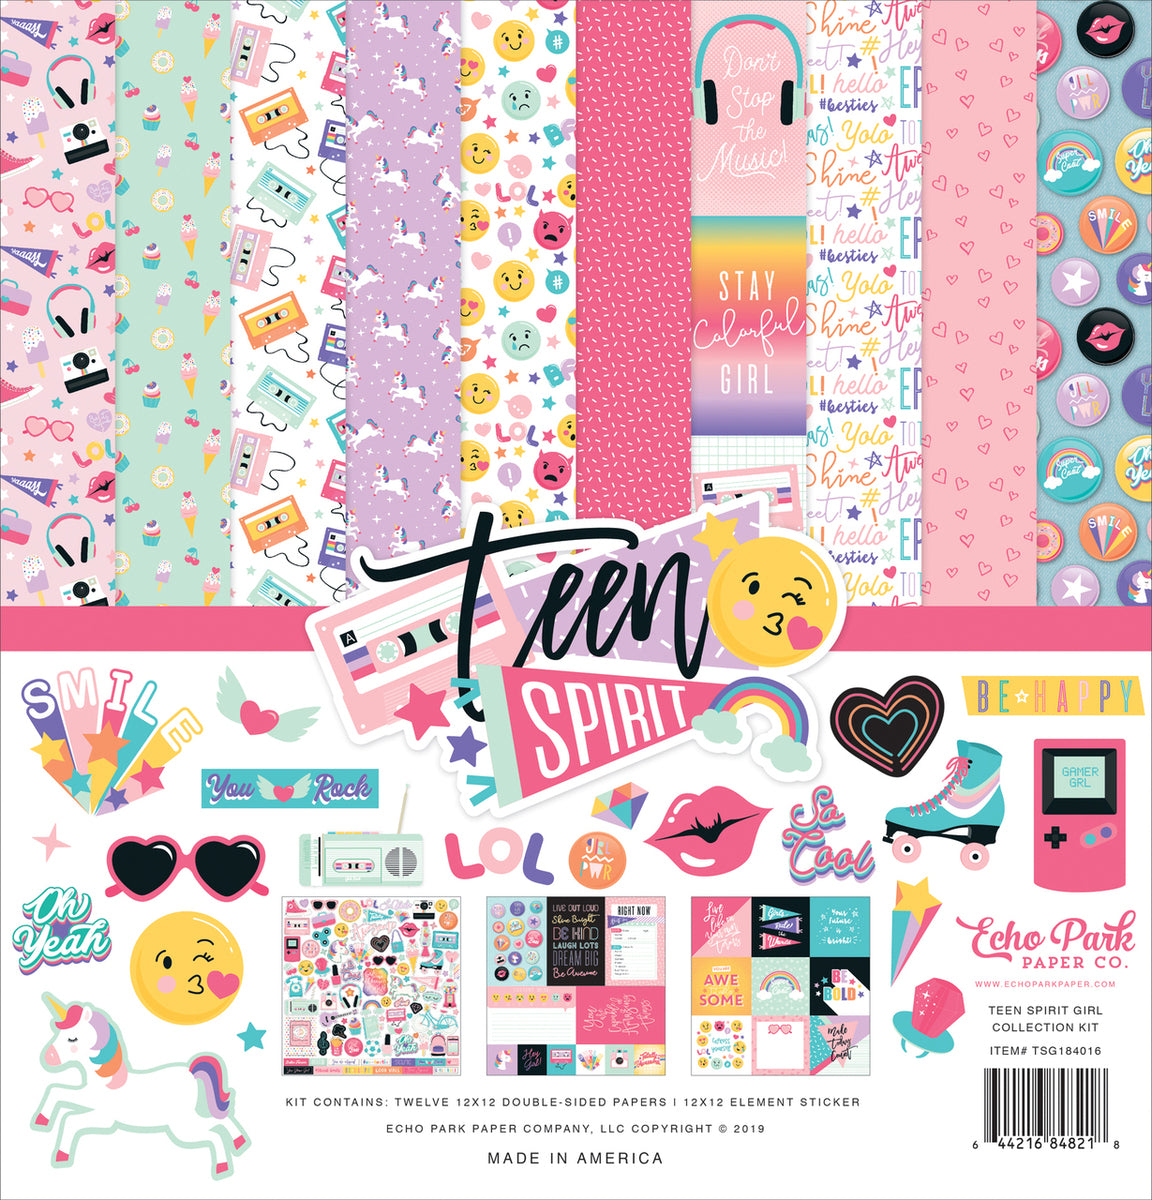 Teen Spirit Girl - 12x12 collection kit from Echo Park Paper